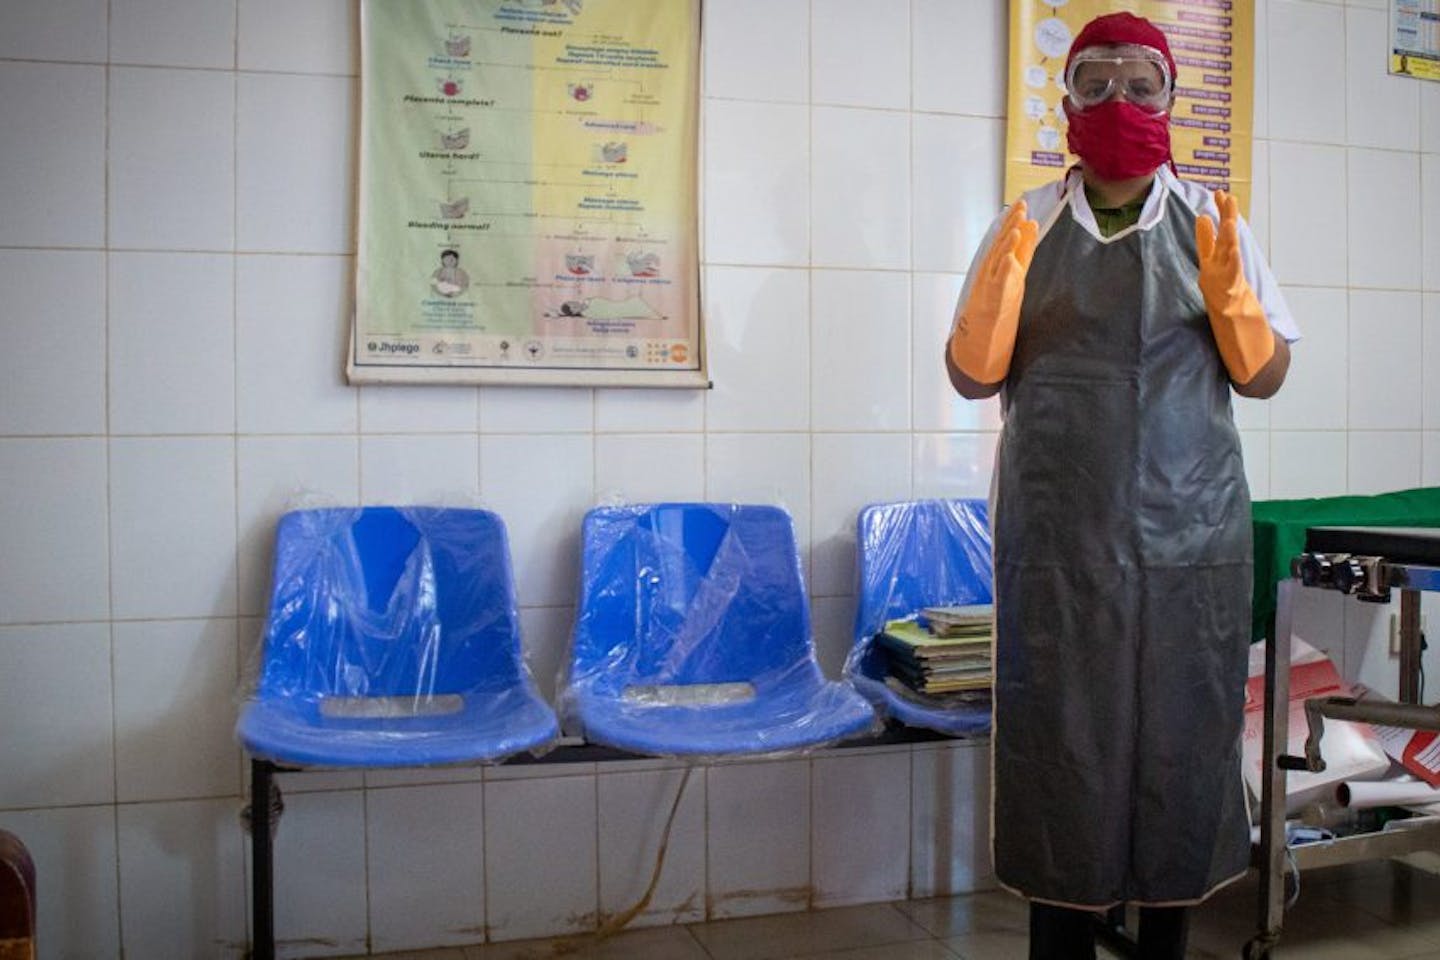 Less than one in five female frontline health workers say protective clothing fits them properly, according to the Women in Global Health network